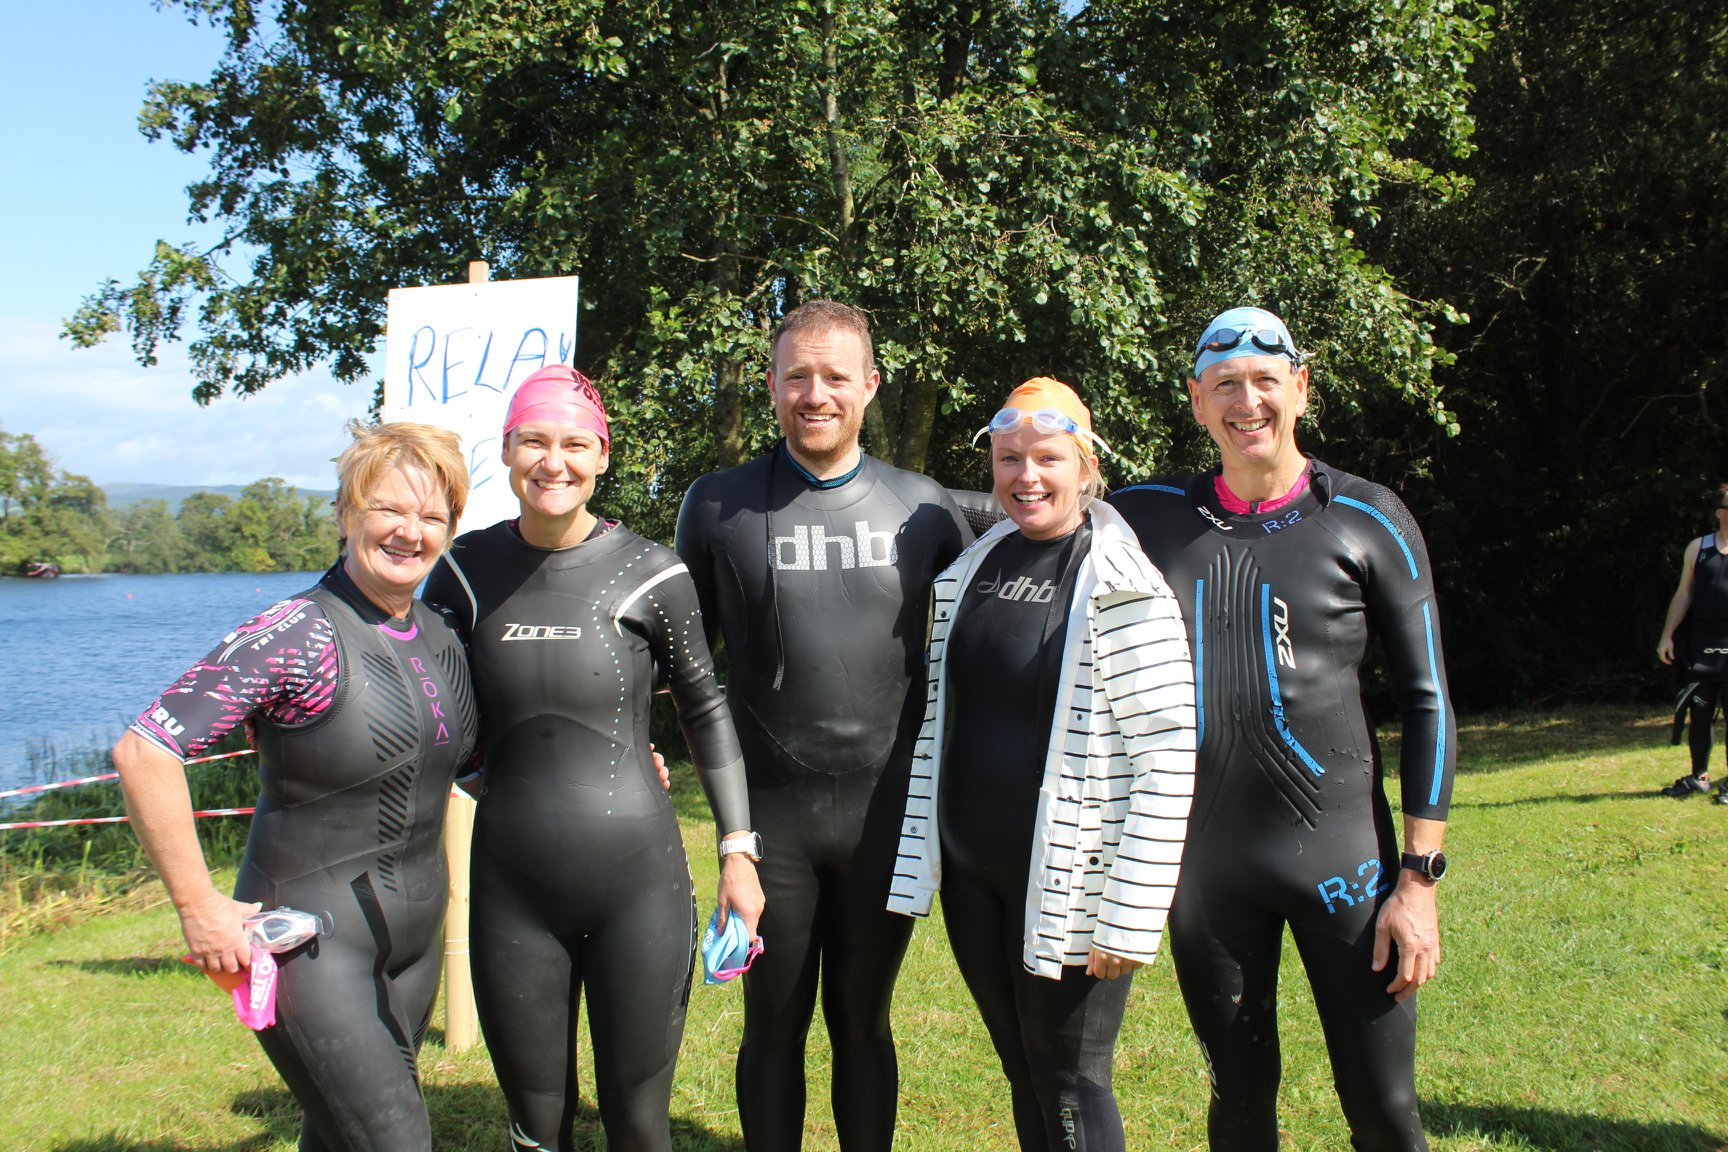 Worlds End Triathlon 2022 returns Saturday, August 20 with proceeds going towards the Castleconnell Boat Club